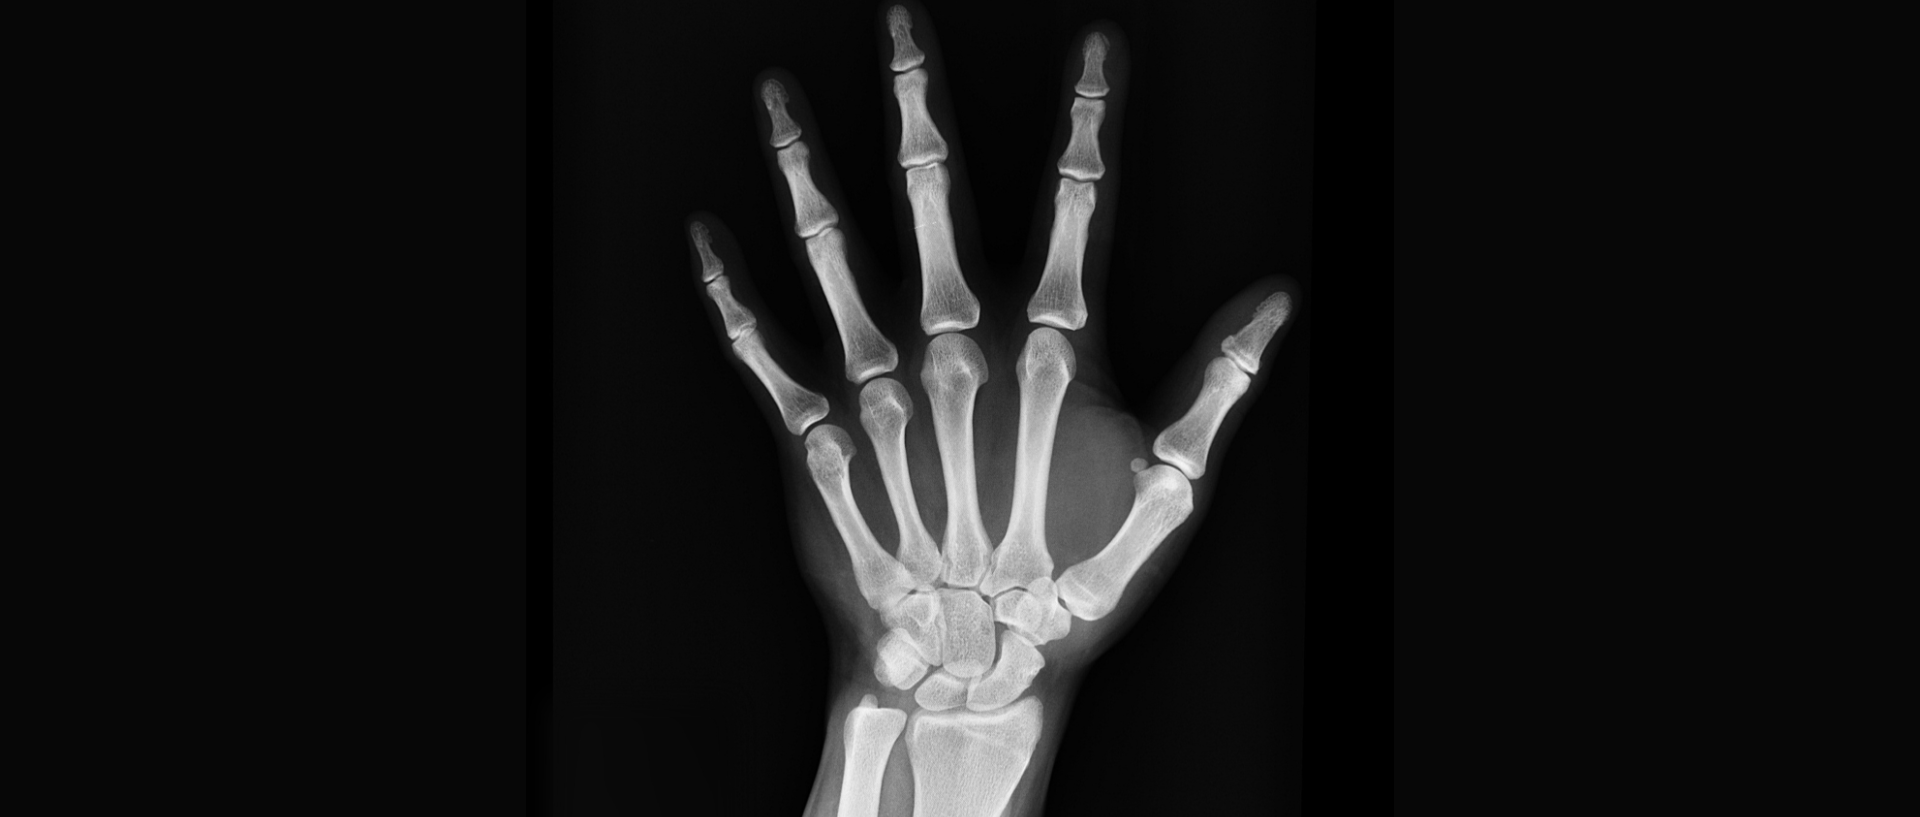 xray of person's hand